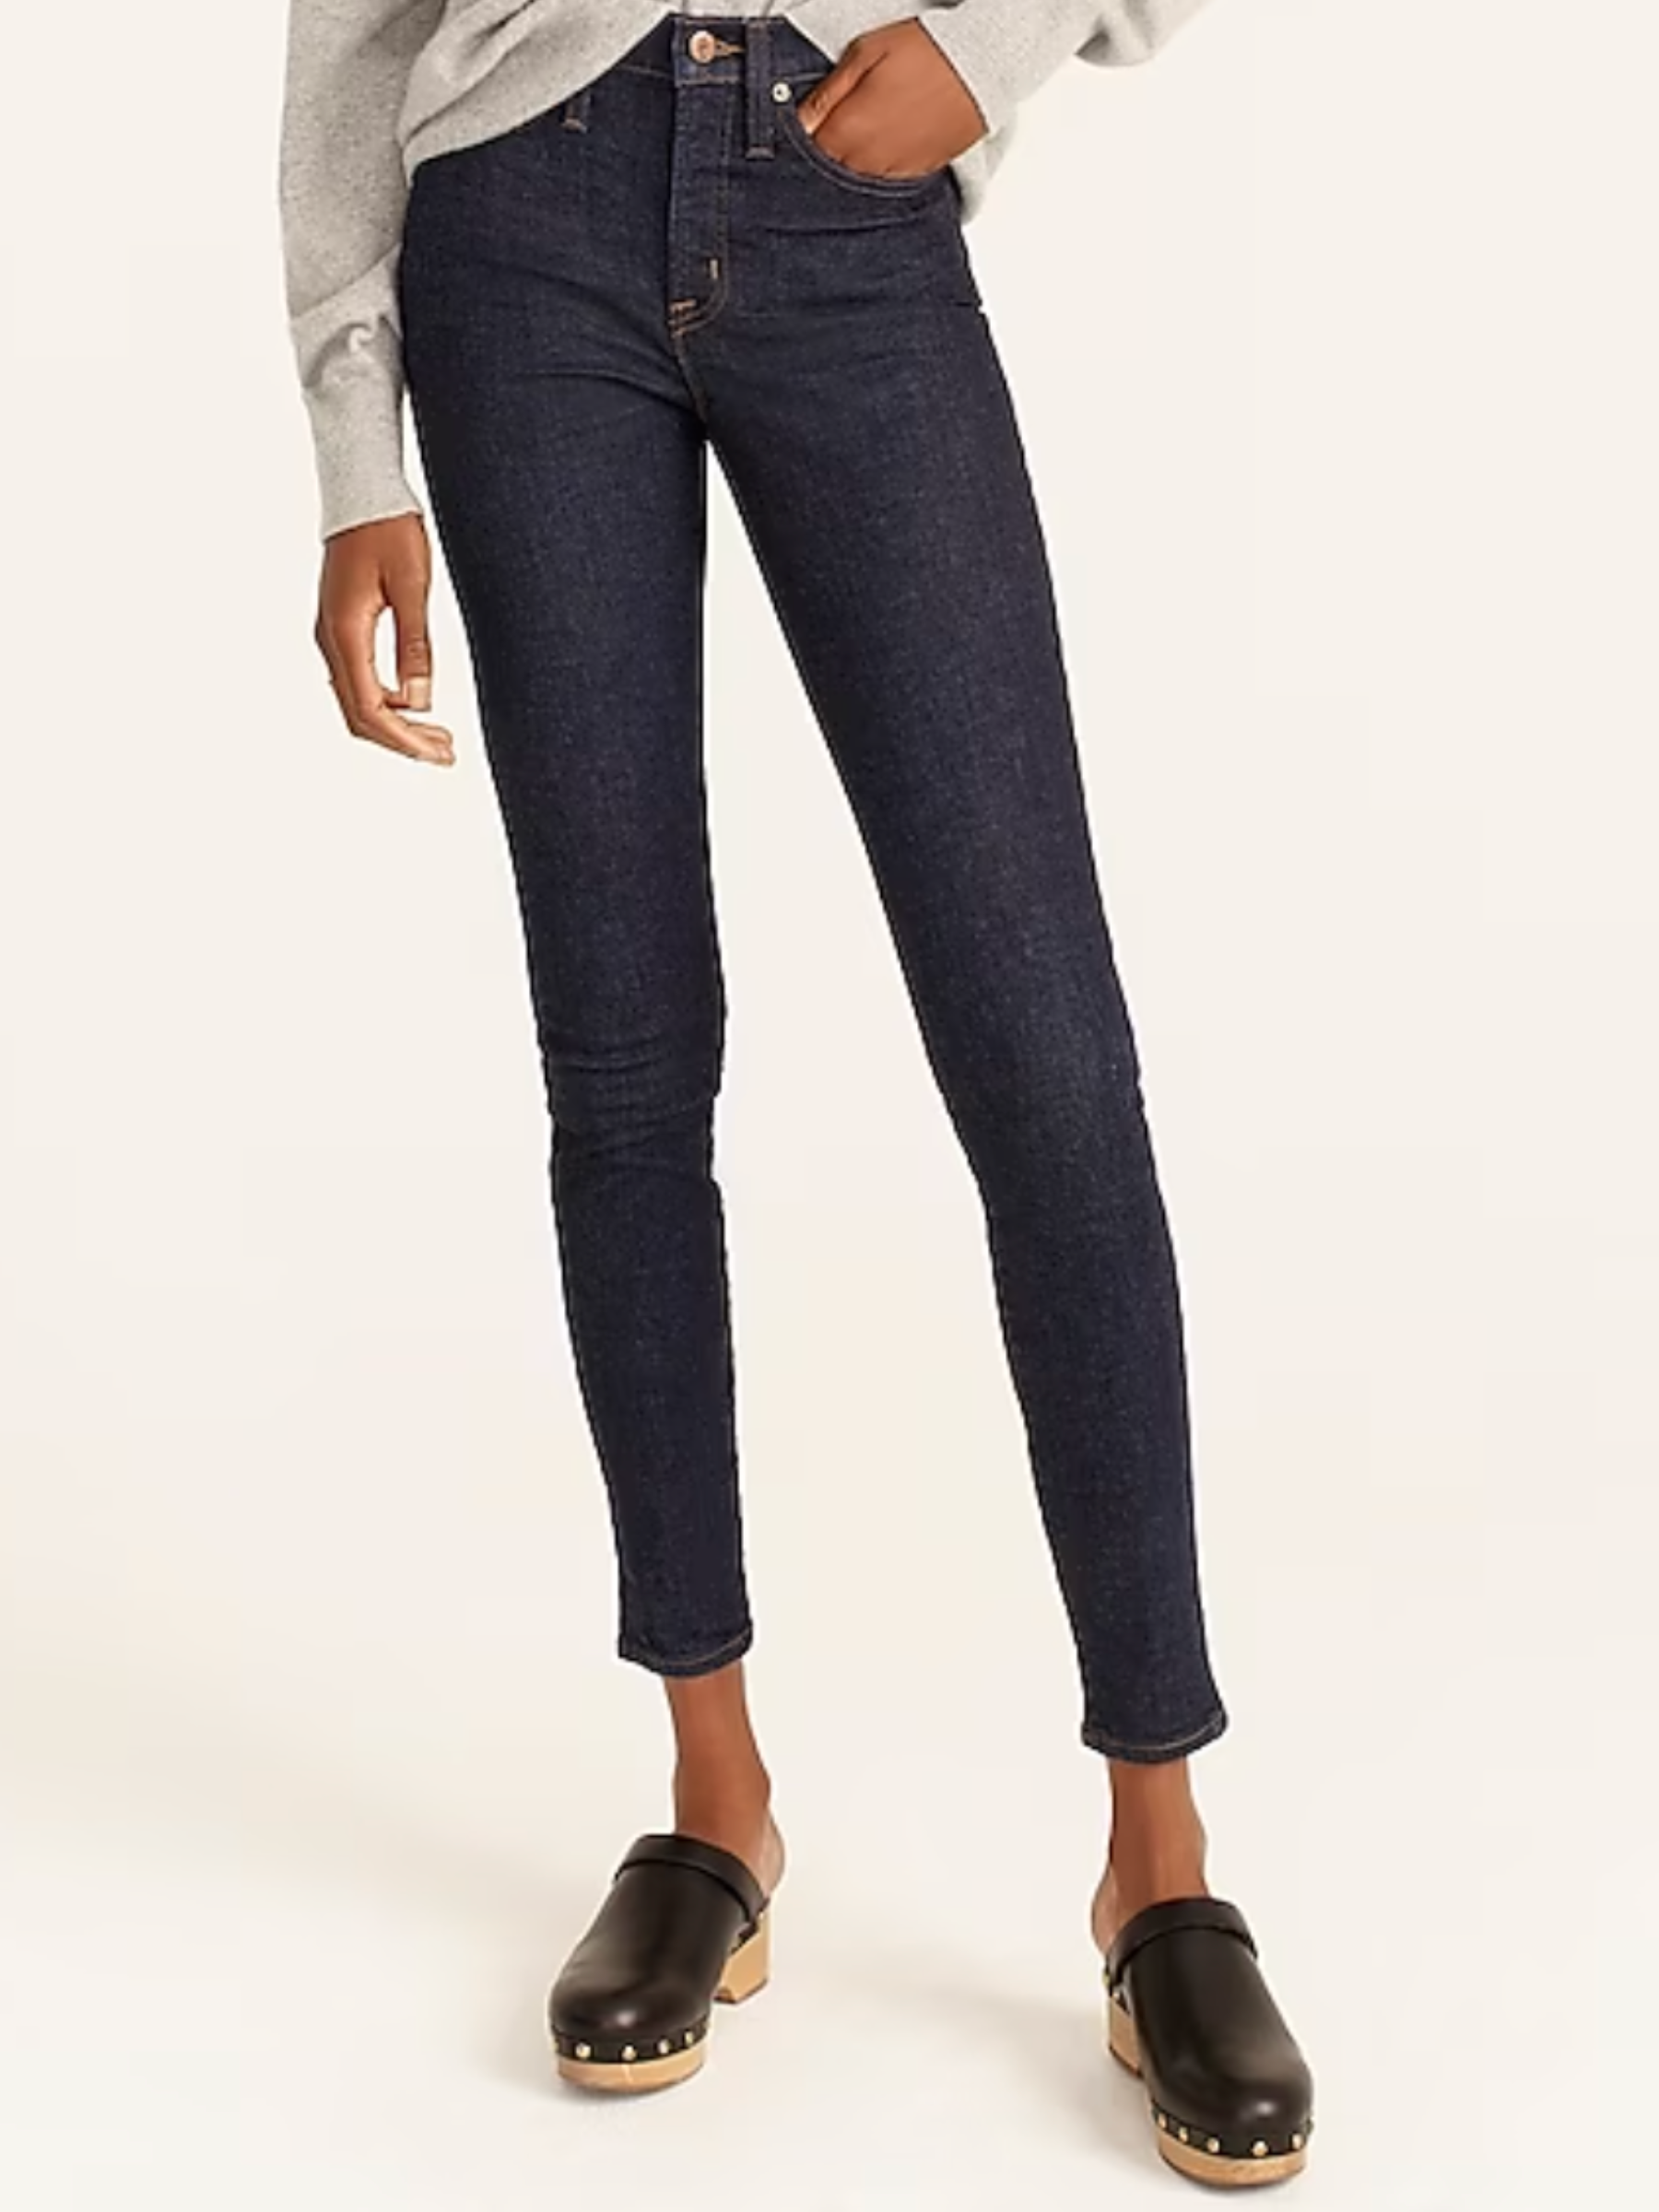 29 Best Mid-Rise Jeans That Fit Just Right, According to Stylists and ...